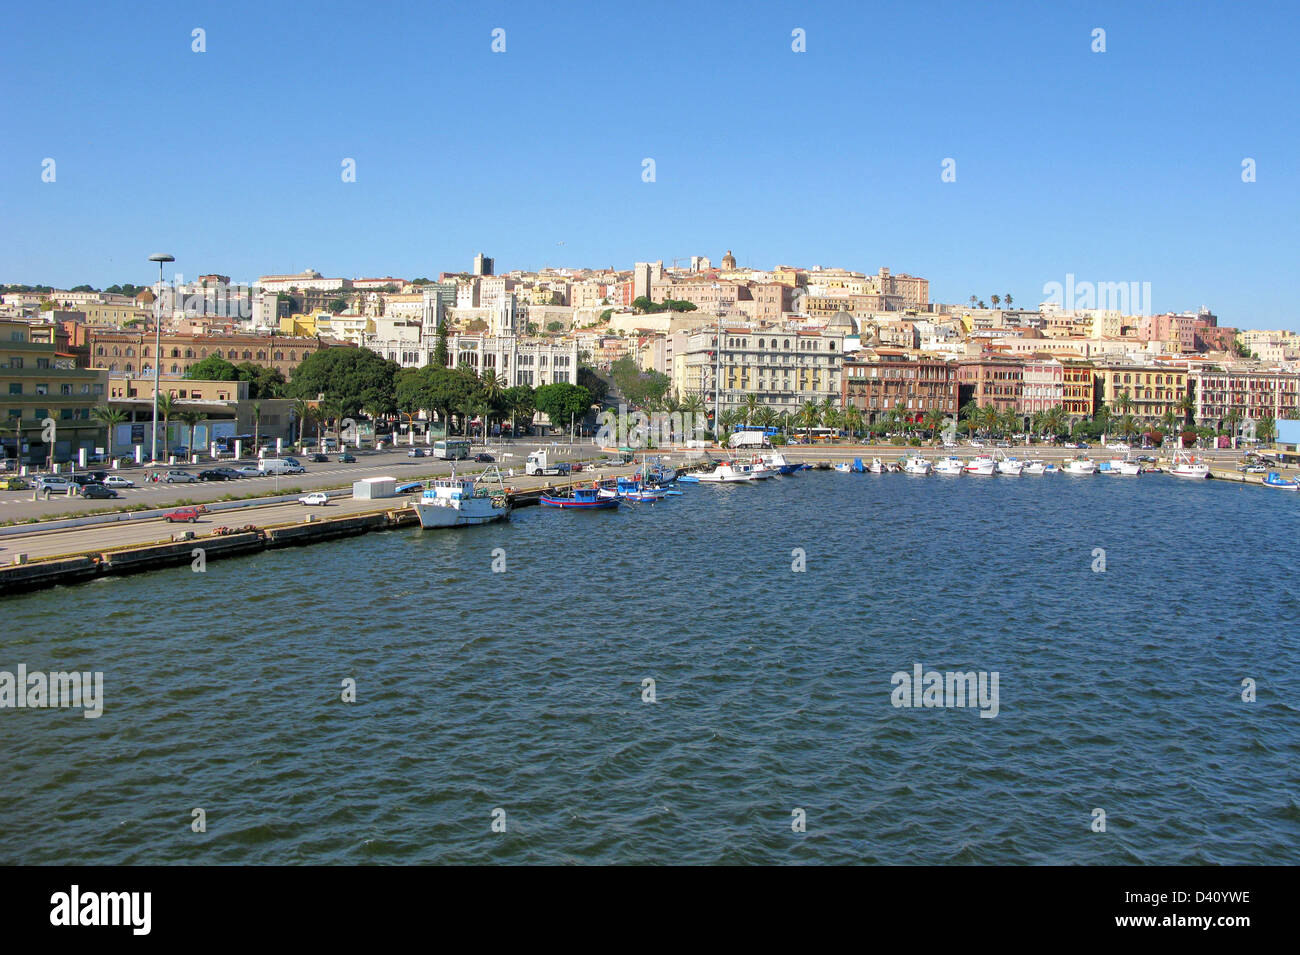 View of Cagliari from the sea, Italy Stock Photo